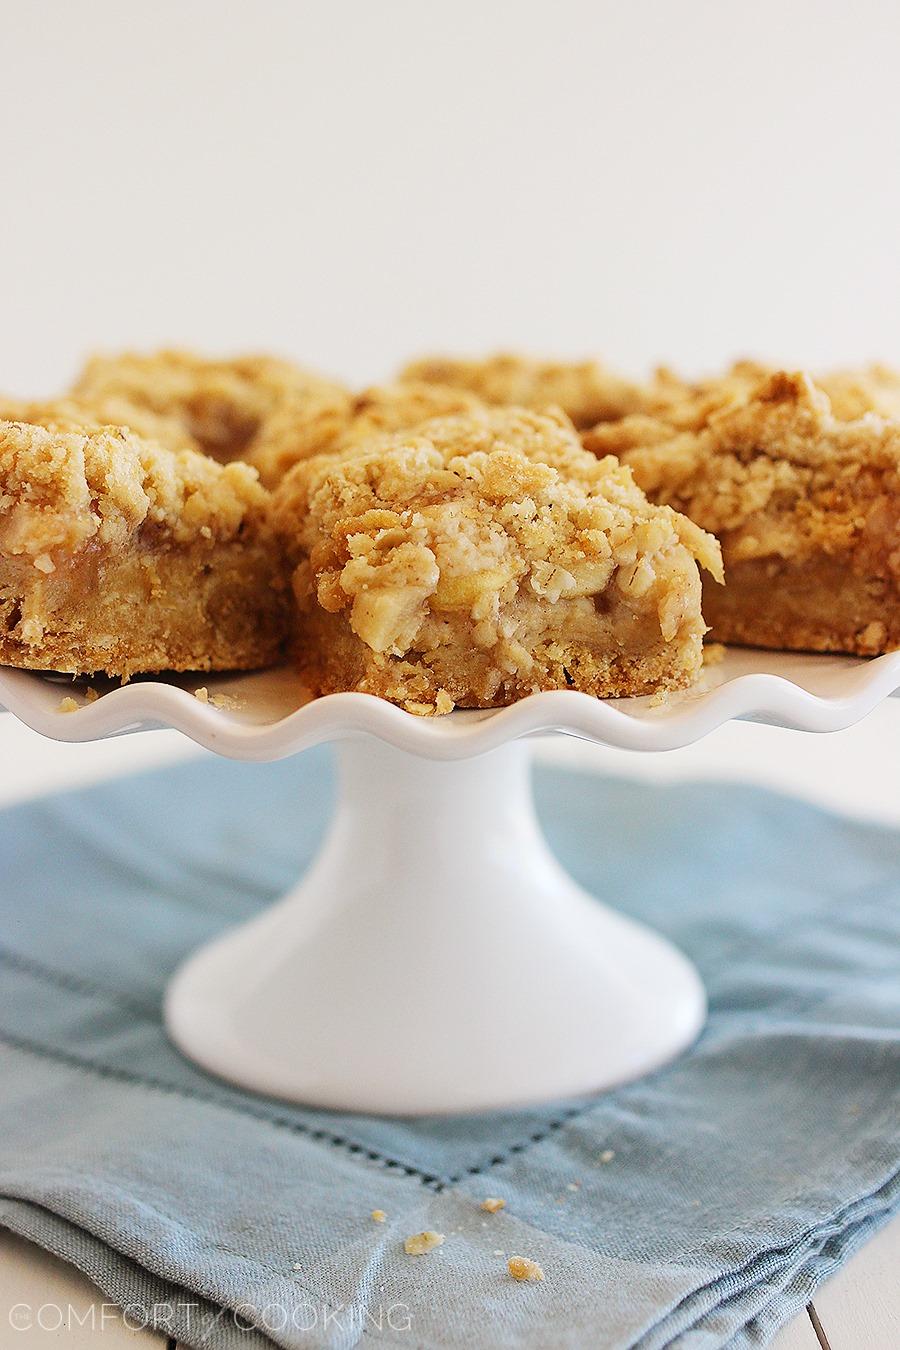 Spiced Apple-Caramel Crumble Bars – These soft, sweet caramel apple bars with a buttery shortbread crust are easier than pie! | thecomfortofcooking.com